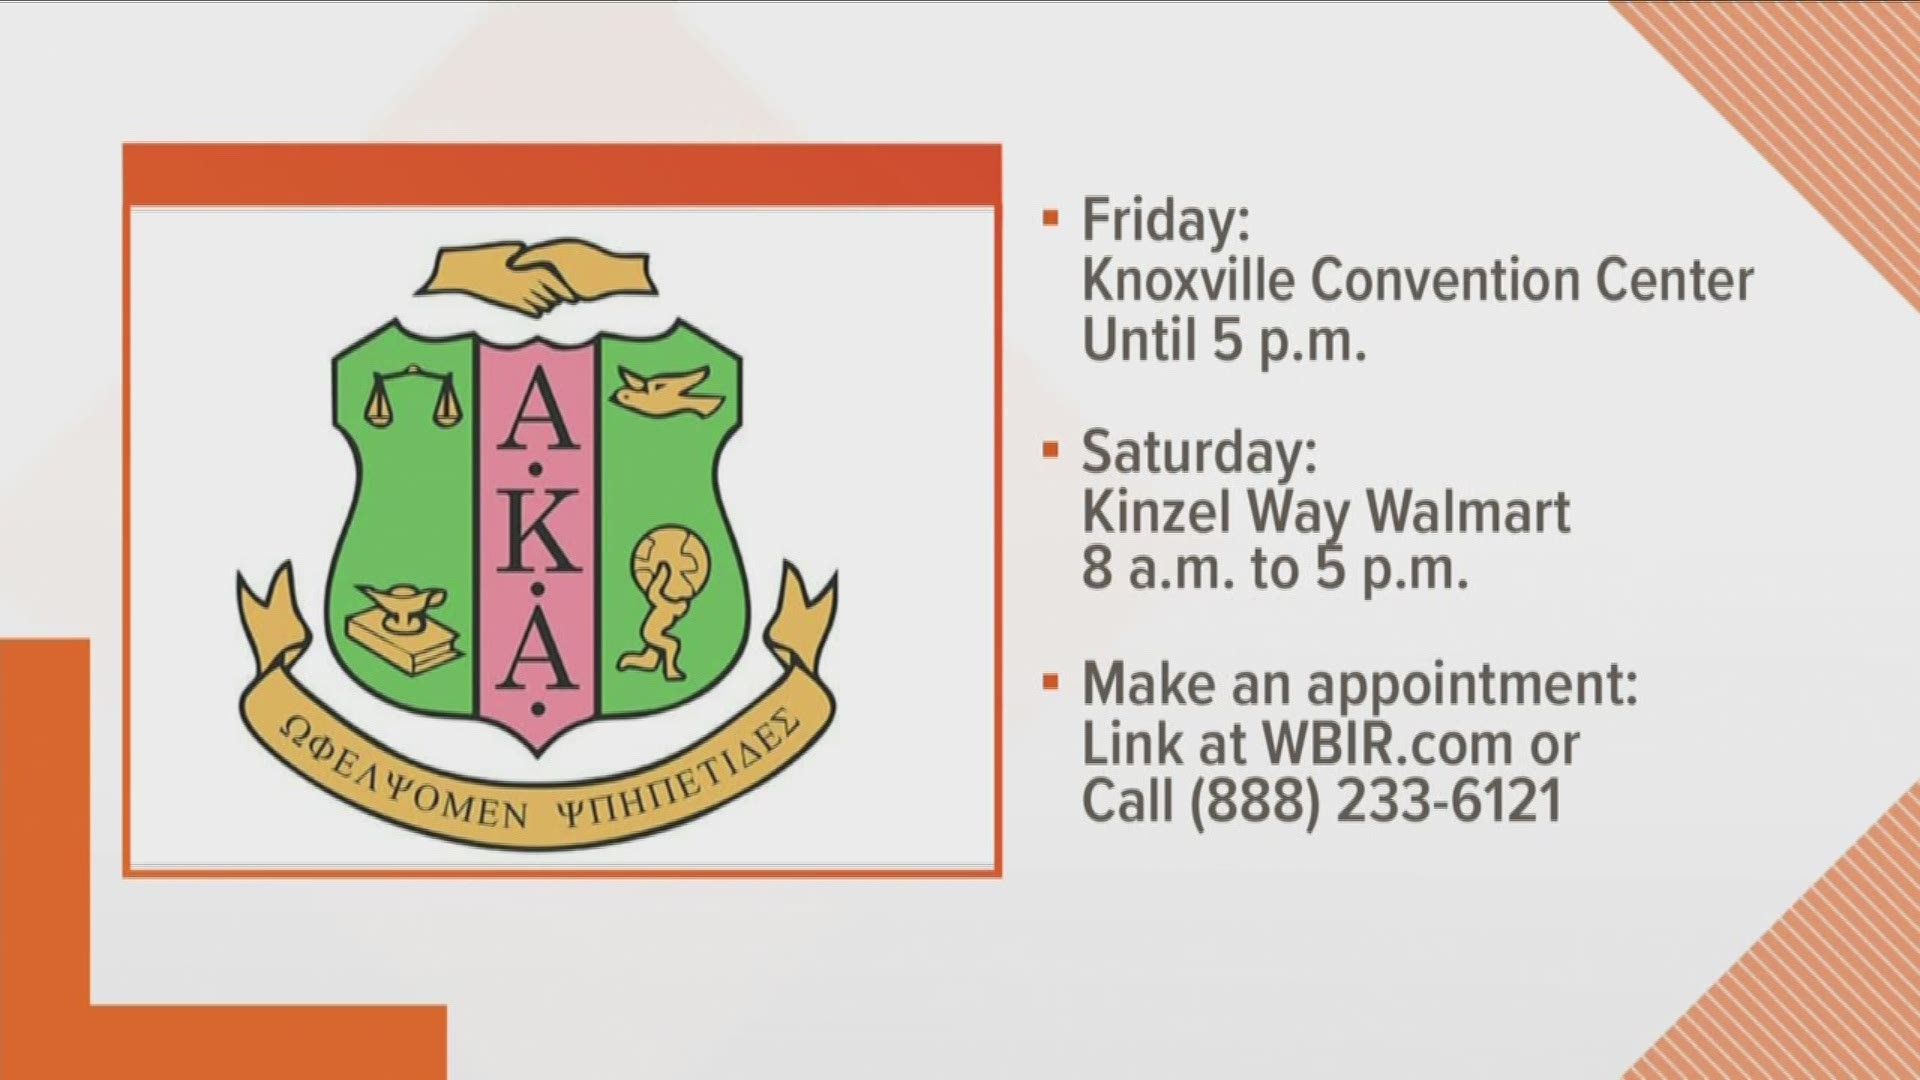 Alpha Kappa Alpha will offer free mammograms for uninsured women on Friday and Saturday.